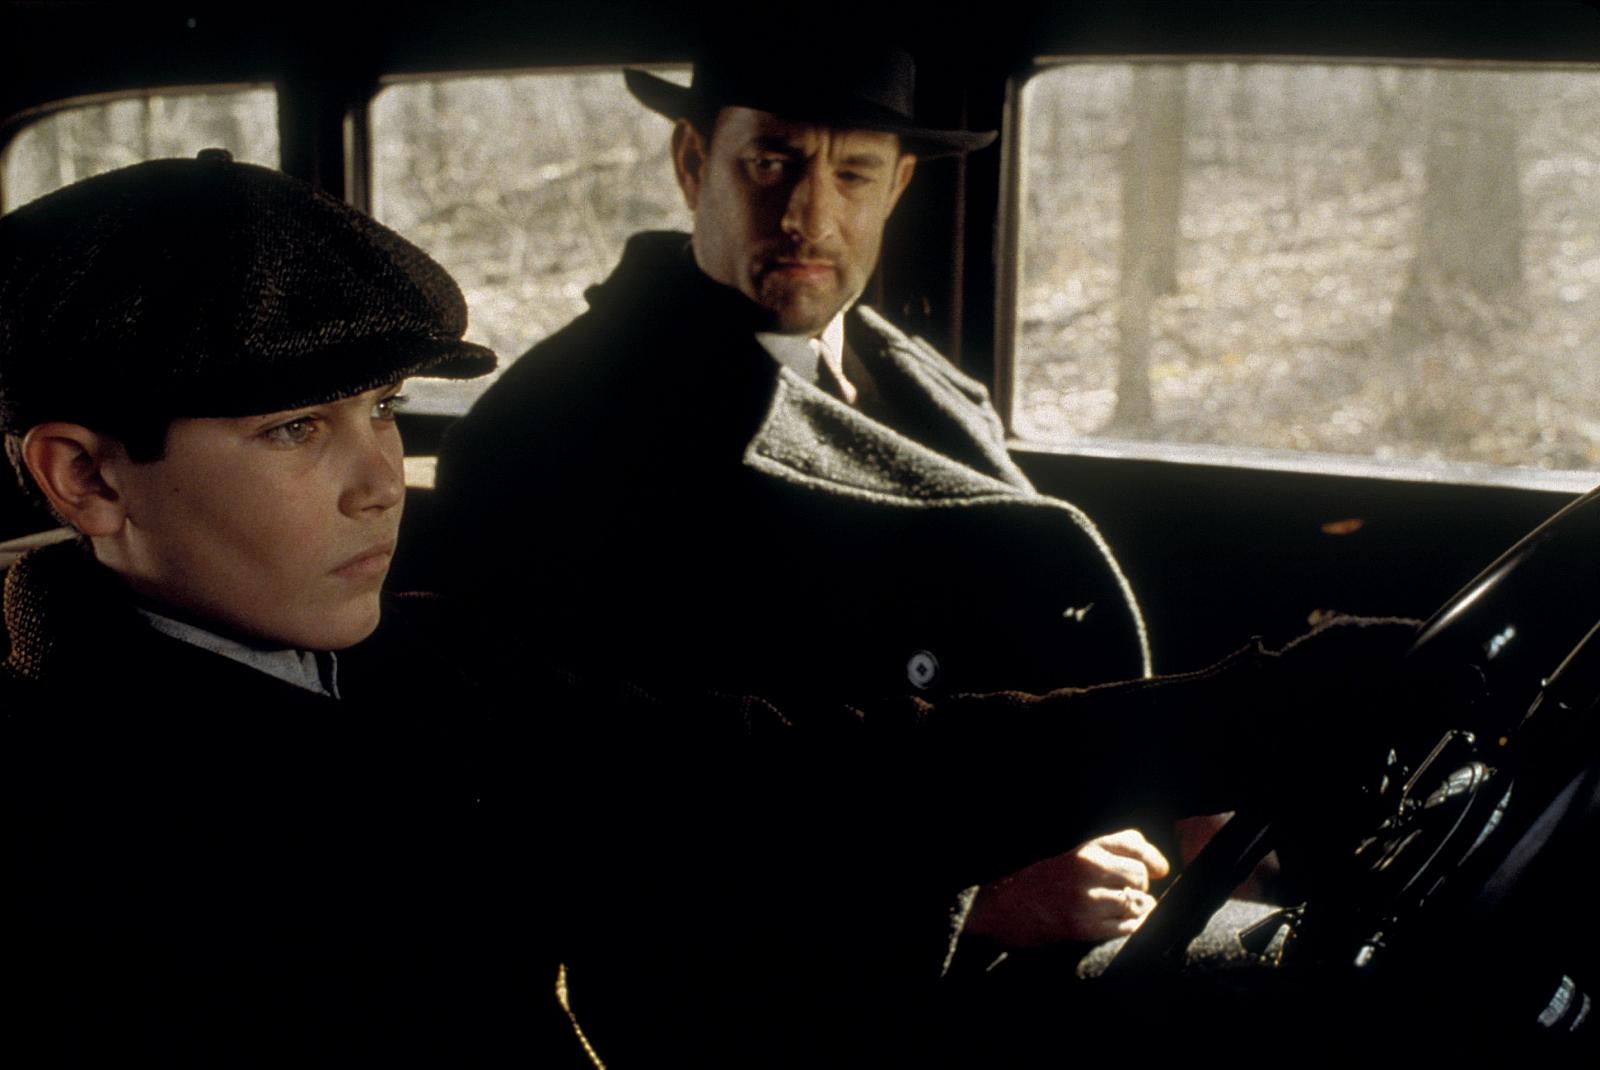 Lessons in Fatherhood from “Road to Perdition” | #DadsOnFilm